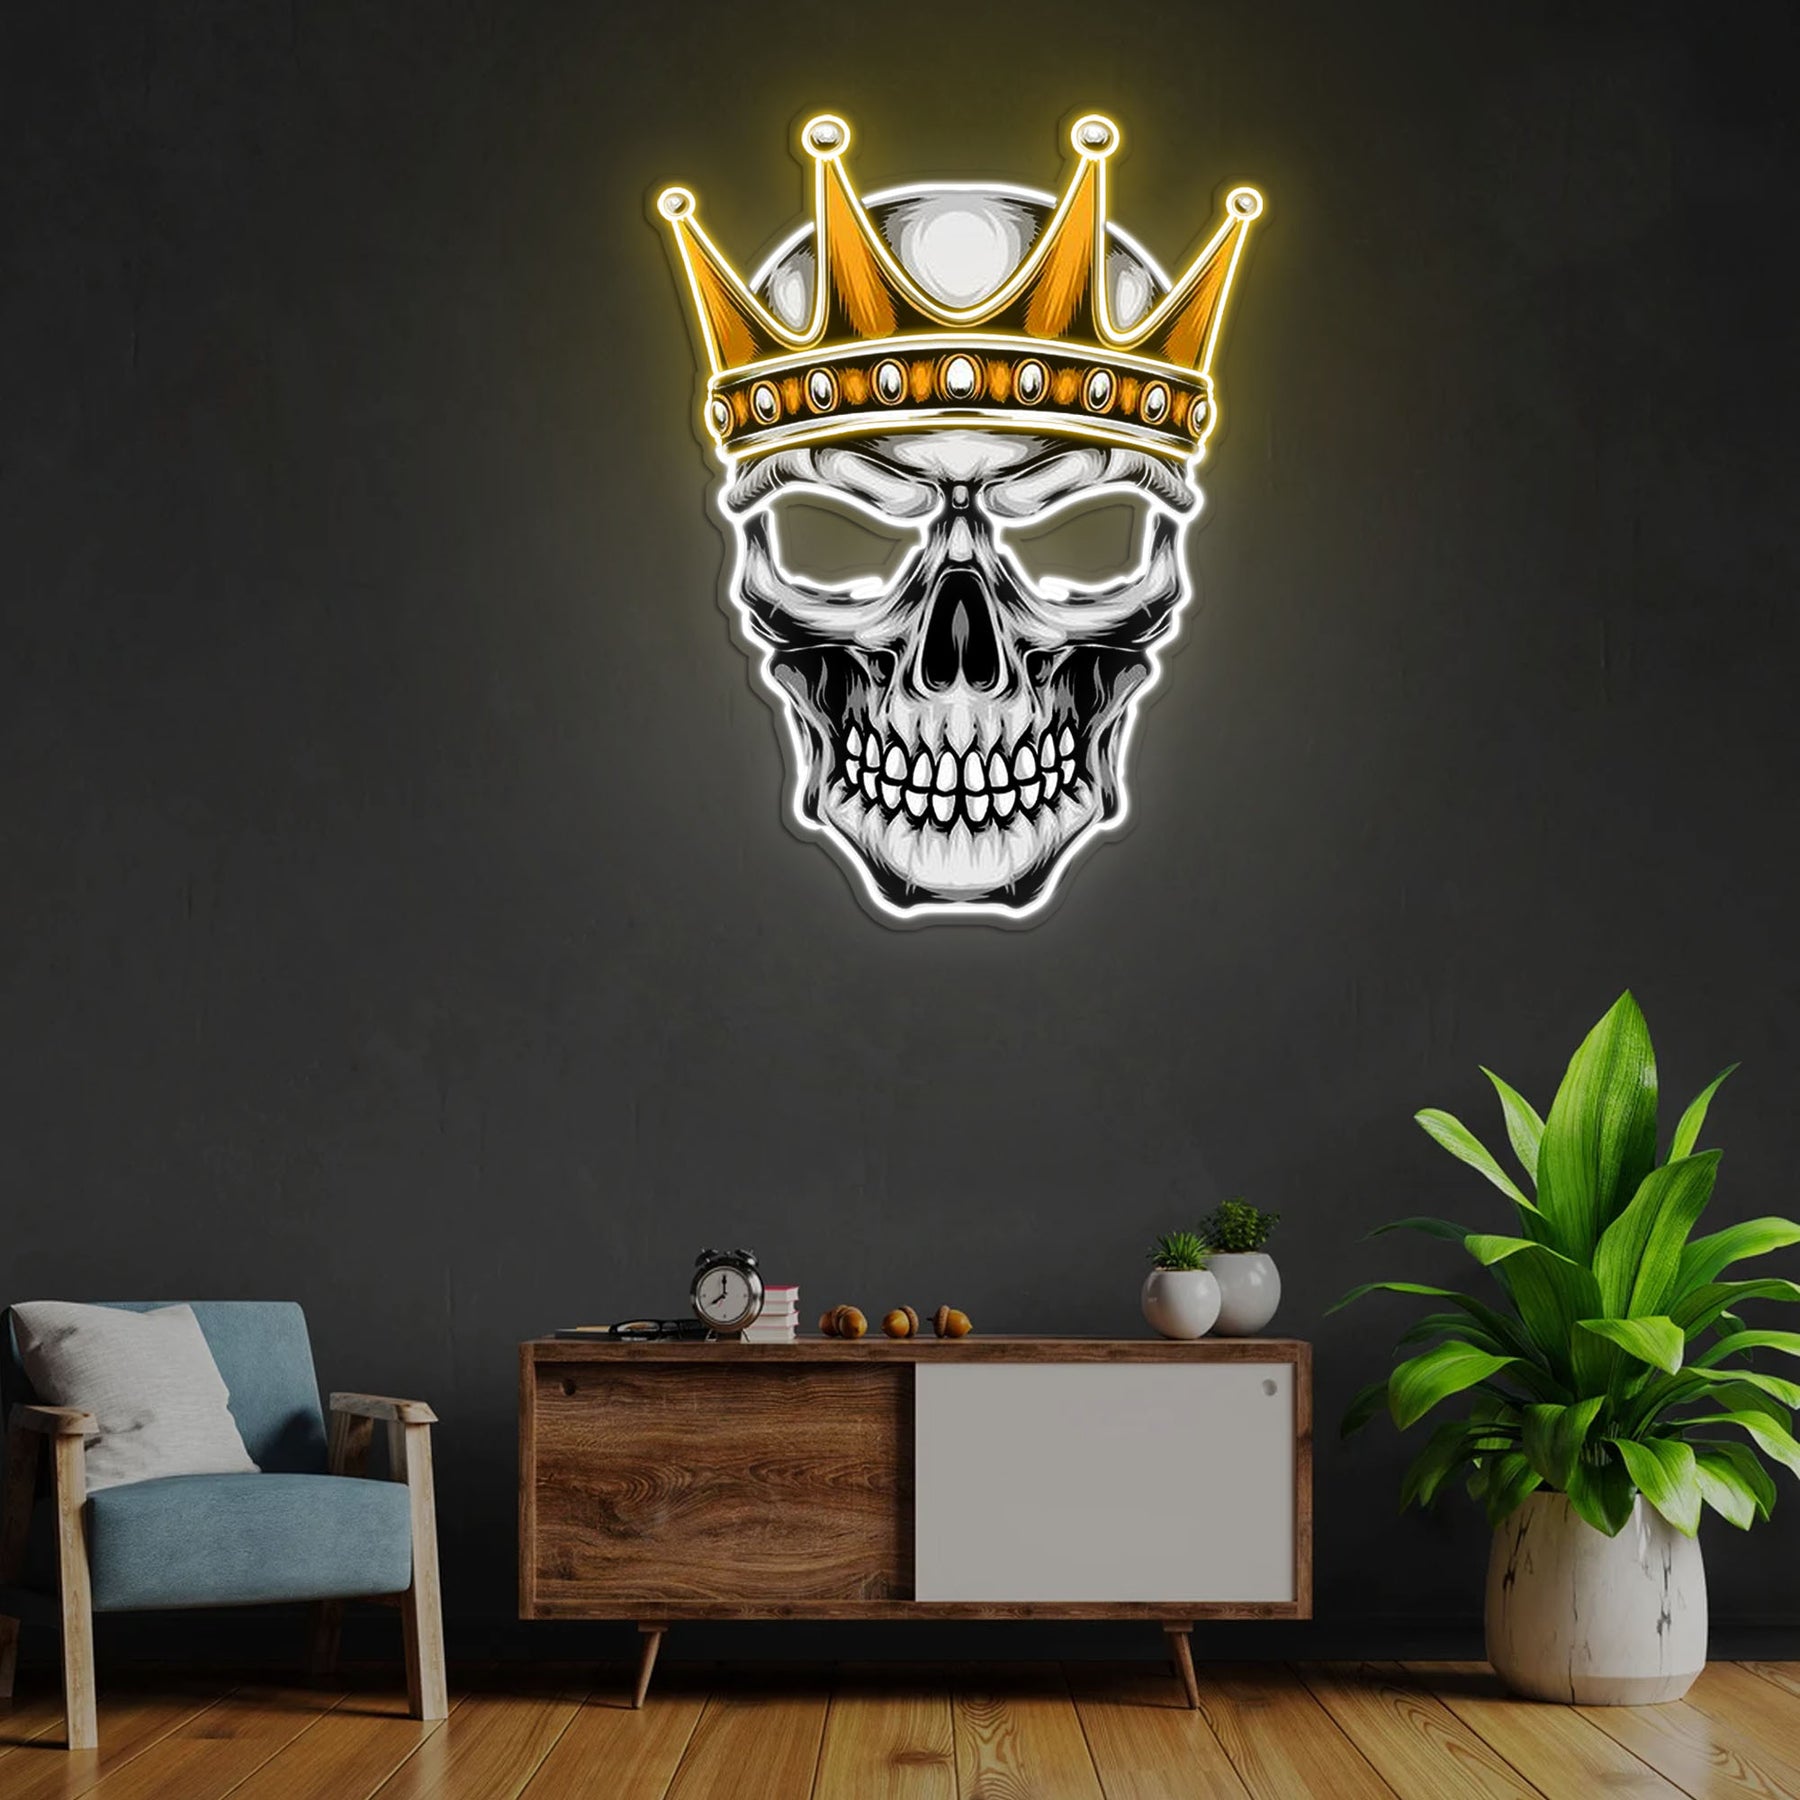 Skull With Crown Neon Sign x Acrylic Artwork